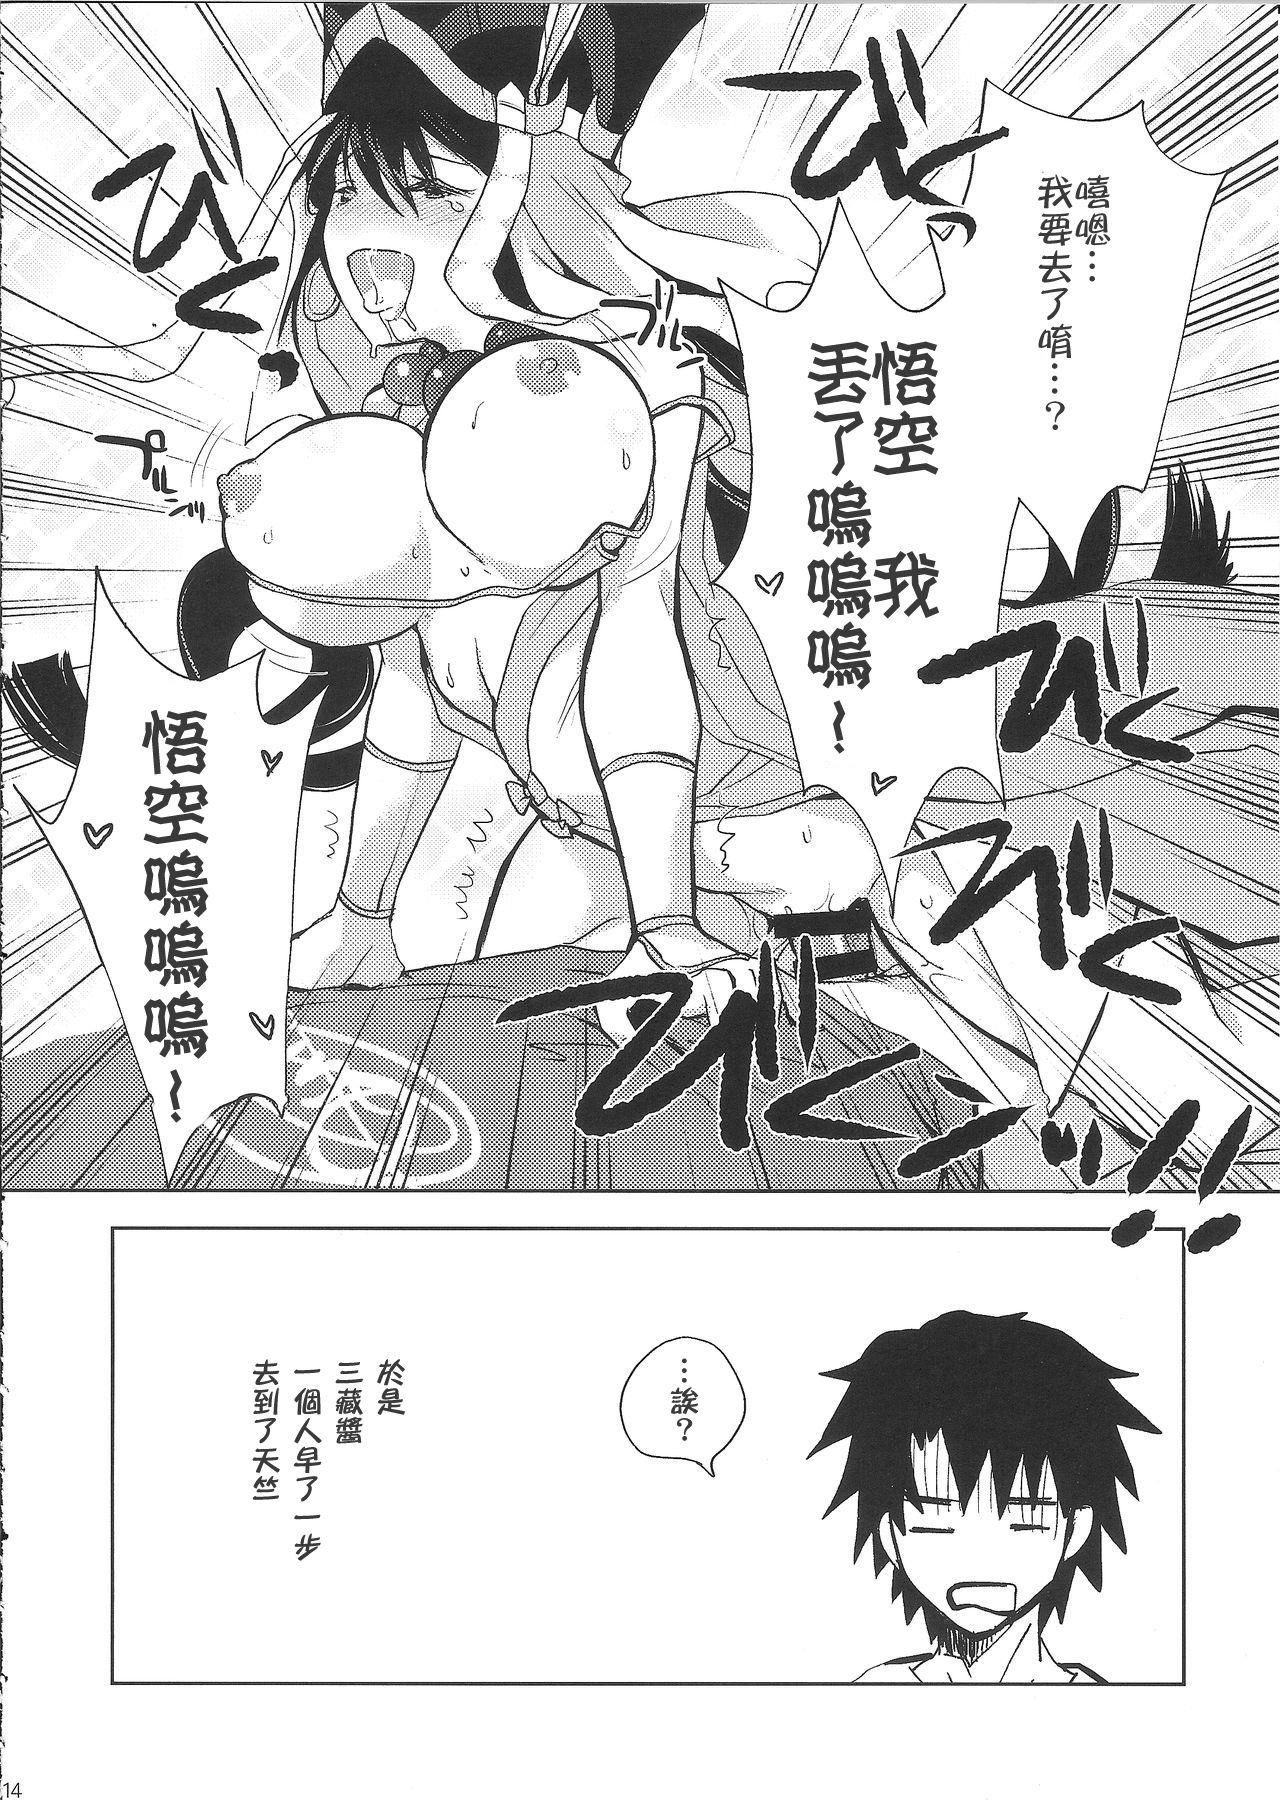 Erotic BLACK EDITION 2 - Fate grand order Toying - Page 12